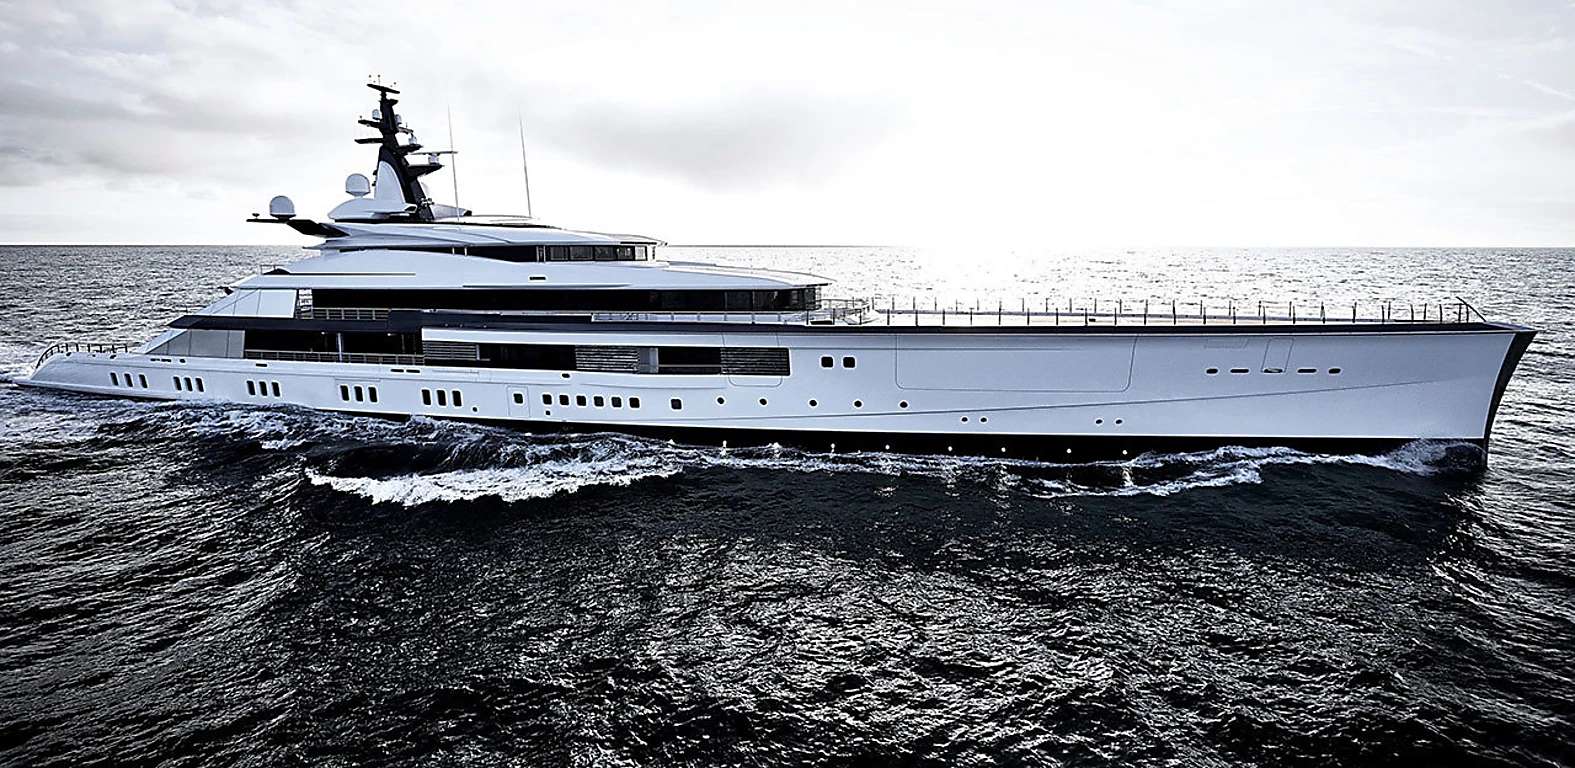 Outbrain Ad Example 56579 - Dallas Cowboys Owner Jerry Jones Splashes Out On Superyacht